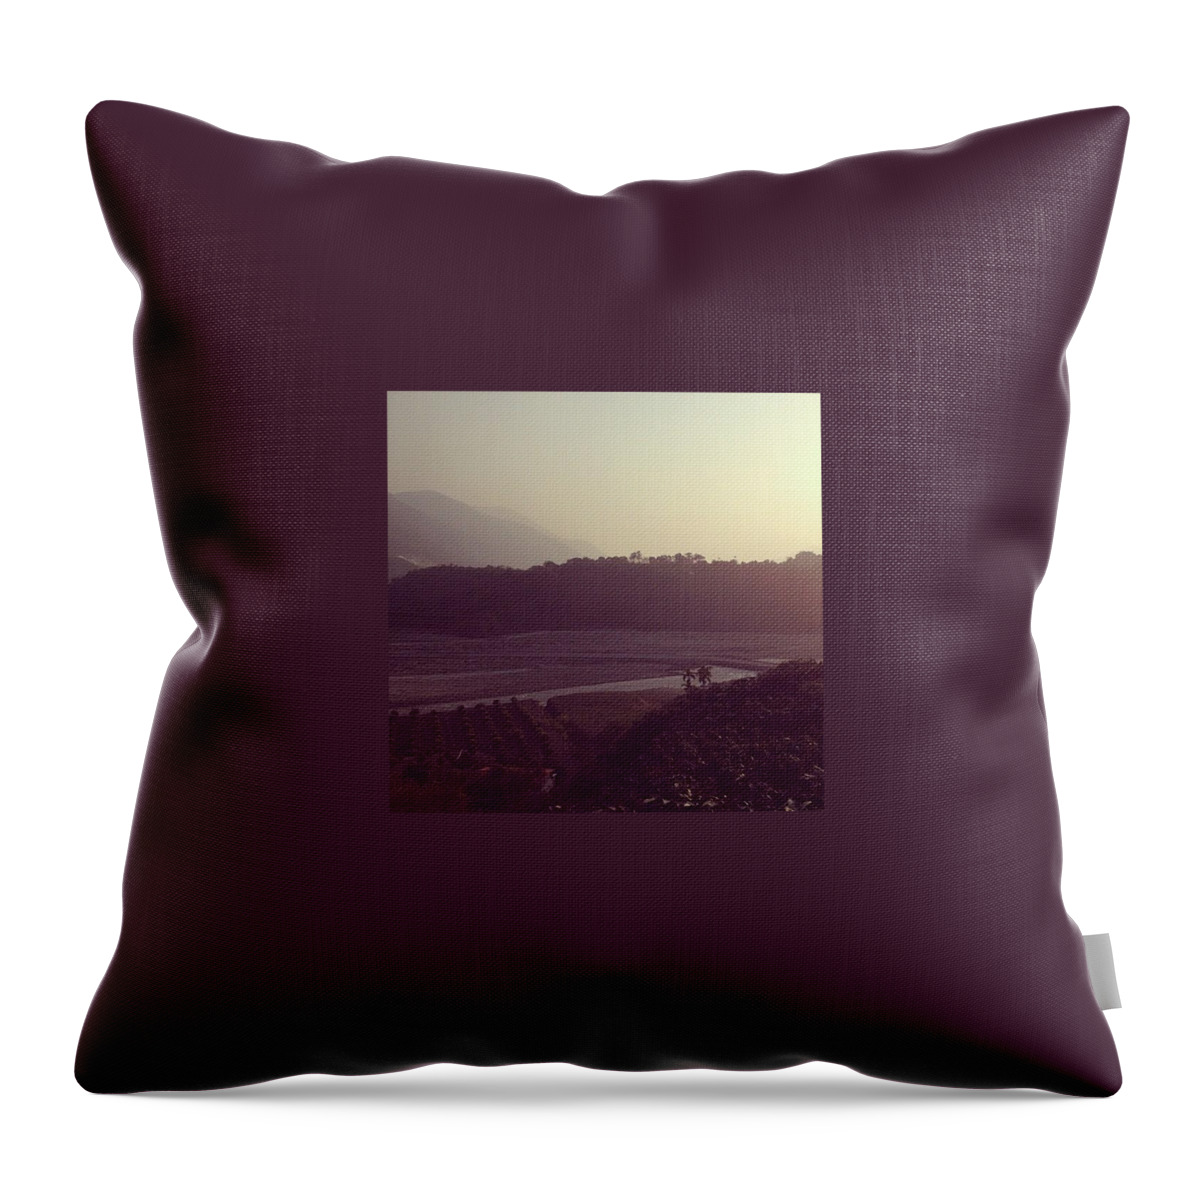 Mountains Throw Pillow featuring the photograph Mountain Hotsprings by Ashley Irwin